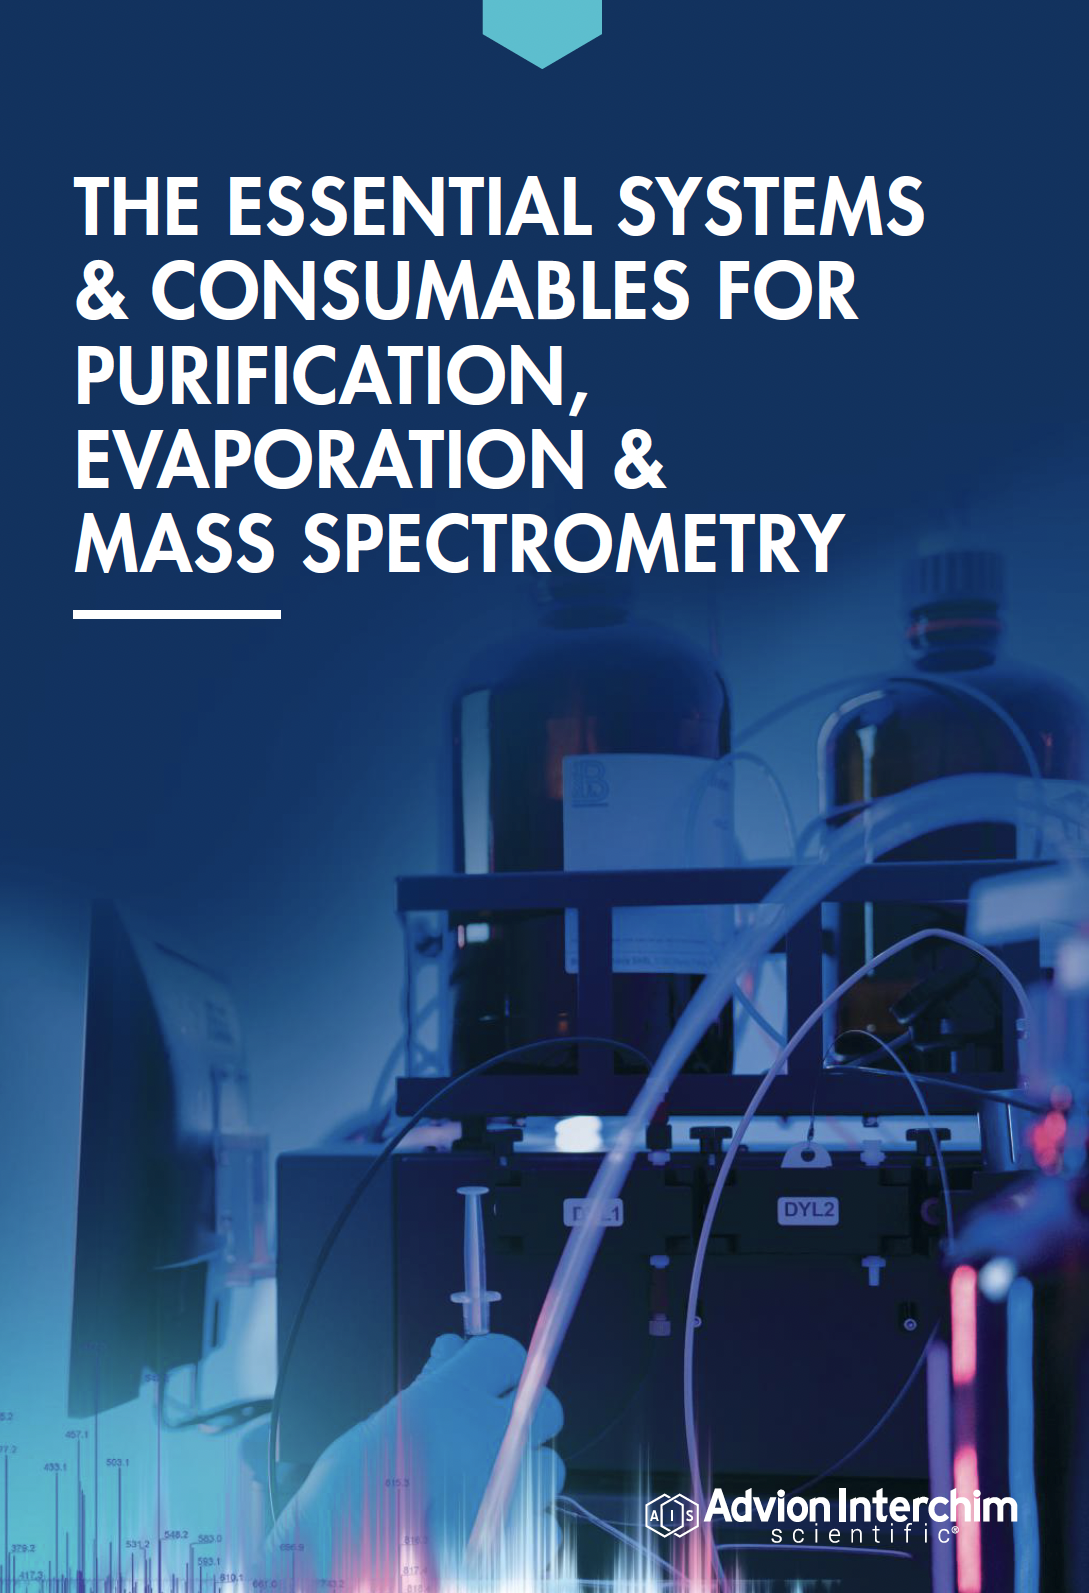 The Essential Systems & Consumables for Purification, Evaporation & Mass Spectrometry